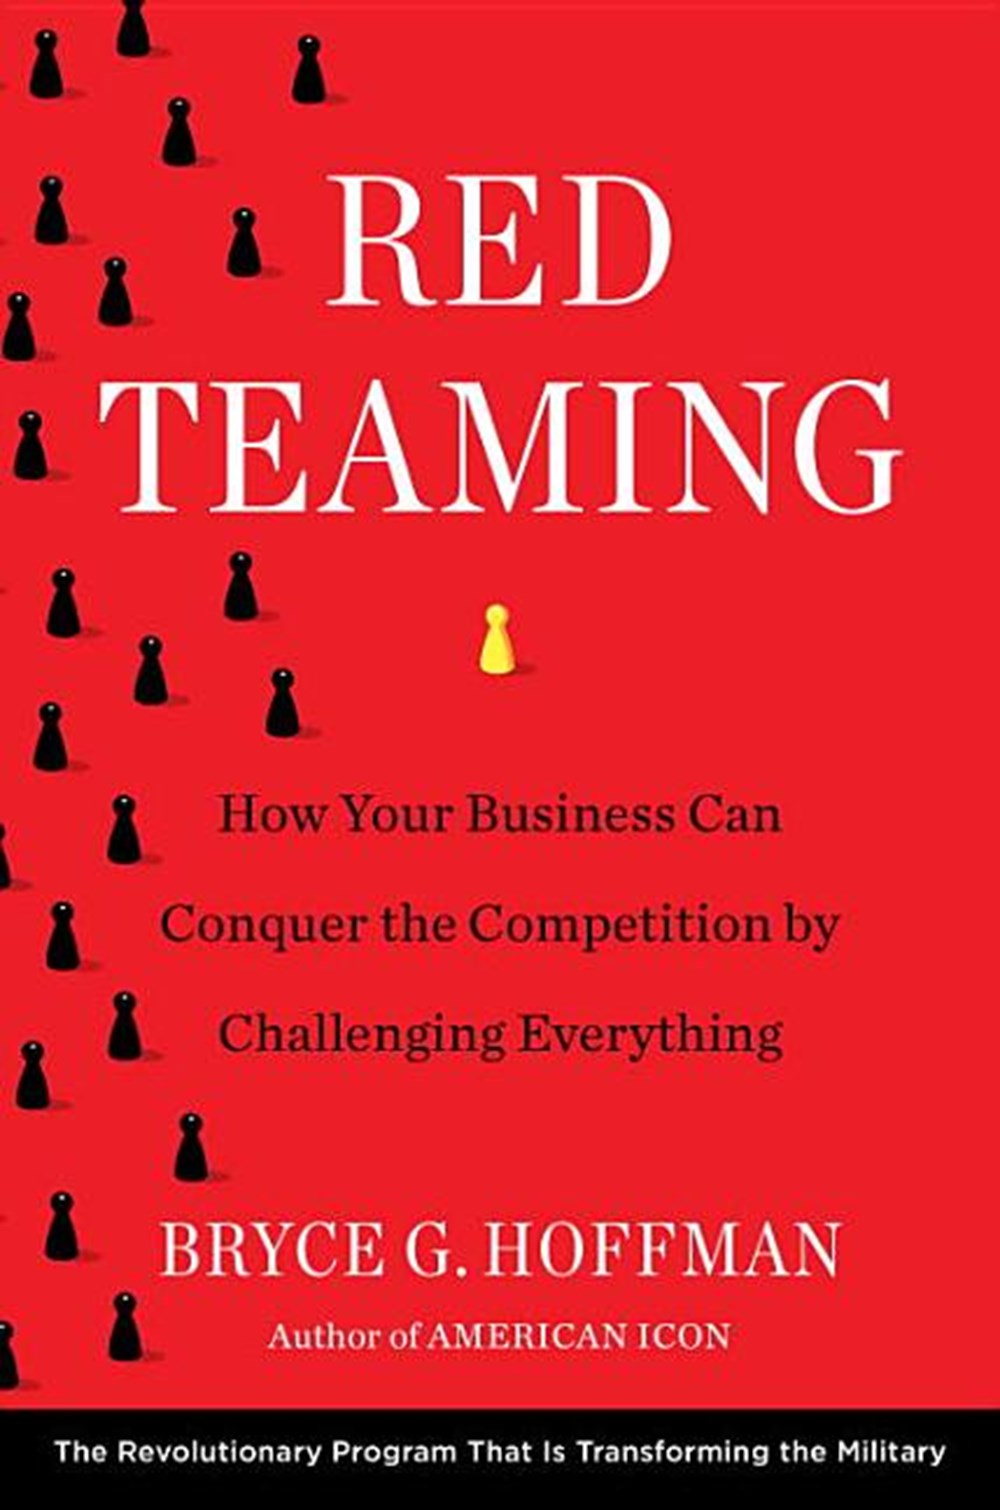 Red Teaming How Your Business Can Conquer the Competition by Challenging Everything